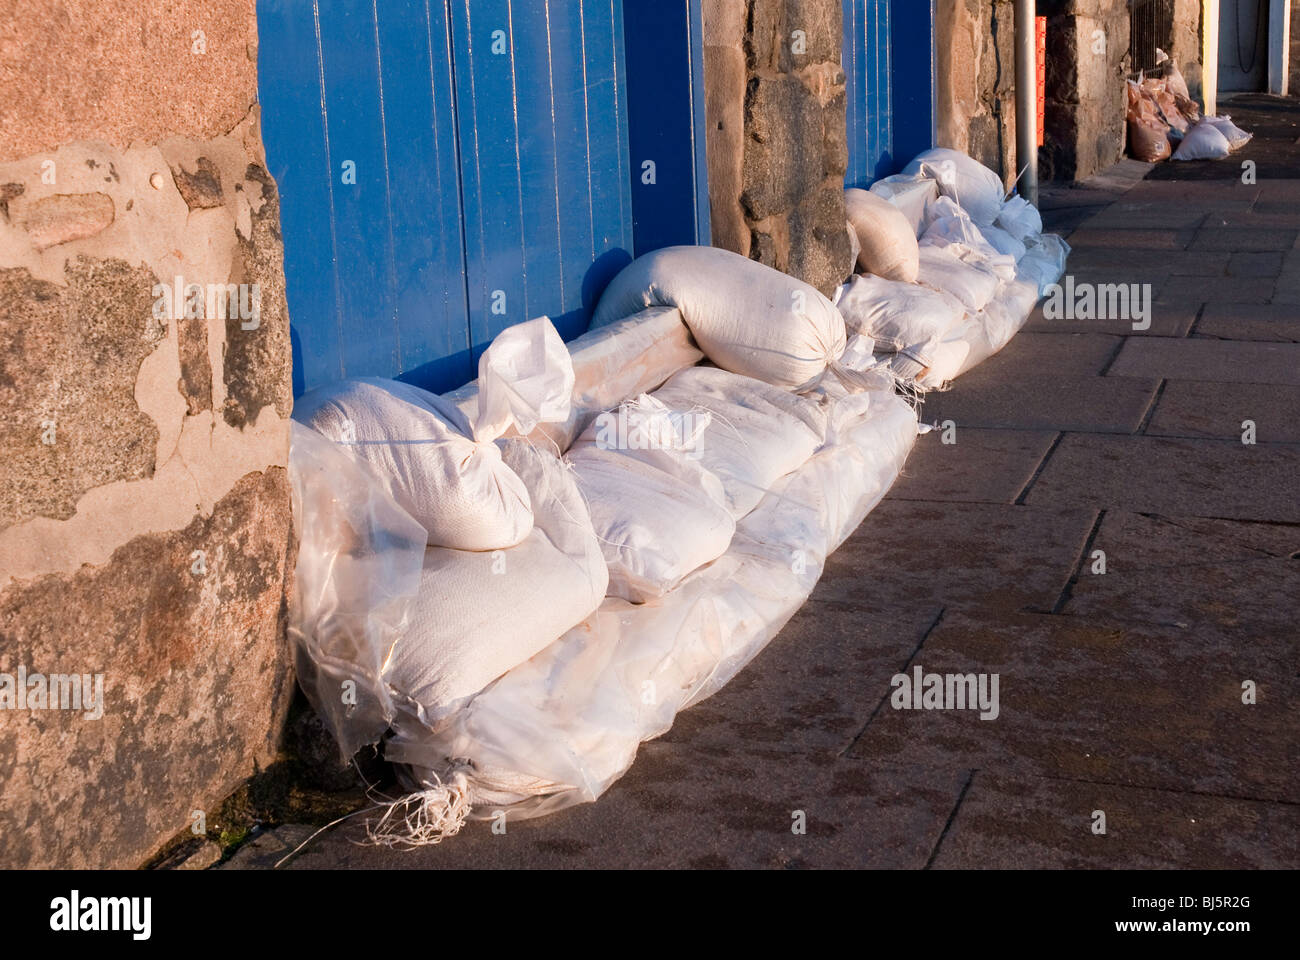 Sandbags placed against building doors in preparation for flooding due to high spring tides. Stock Photo